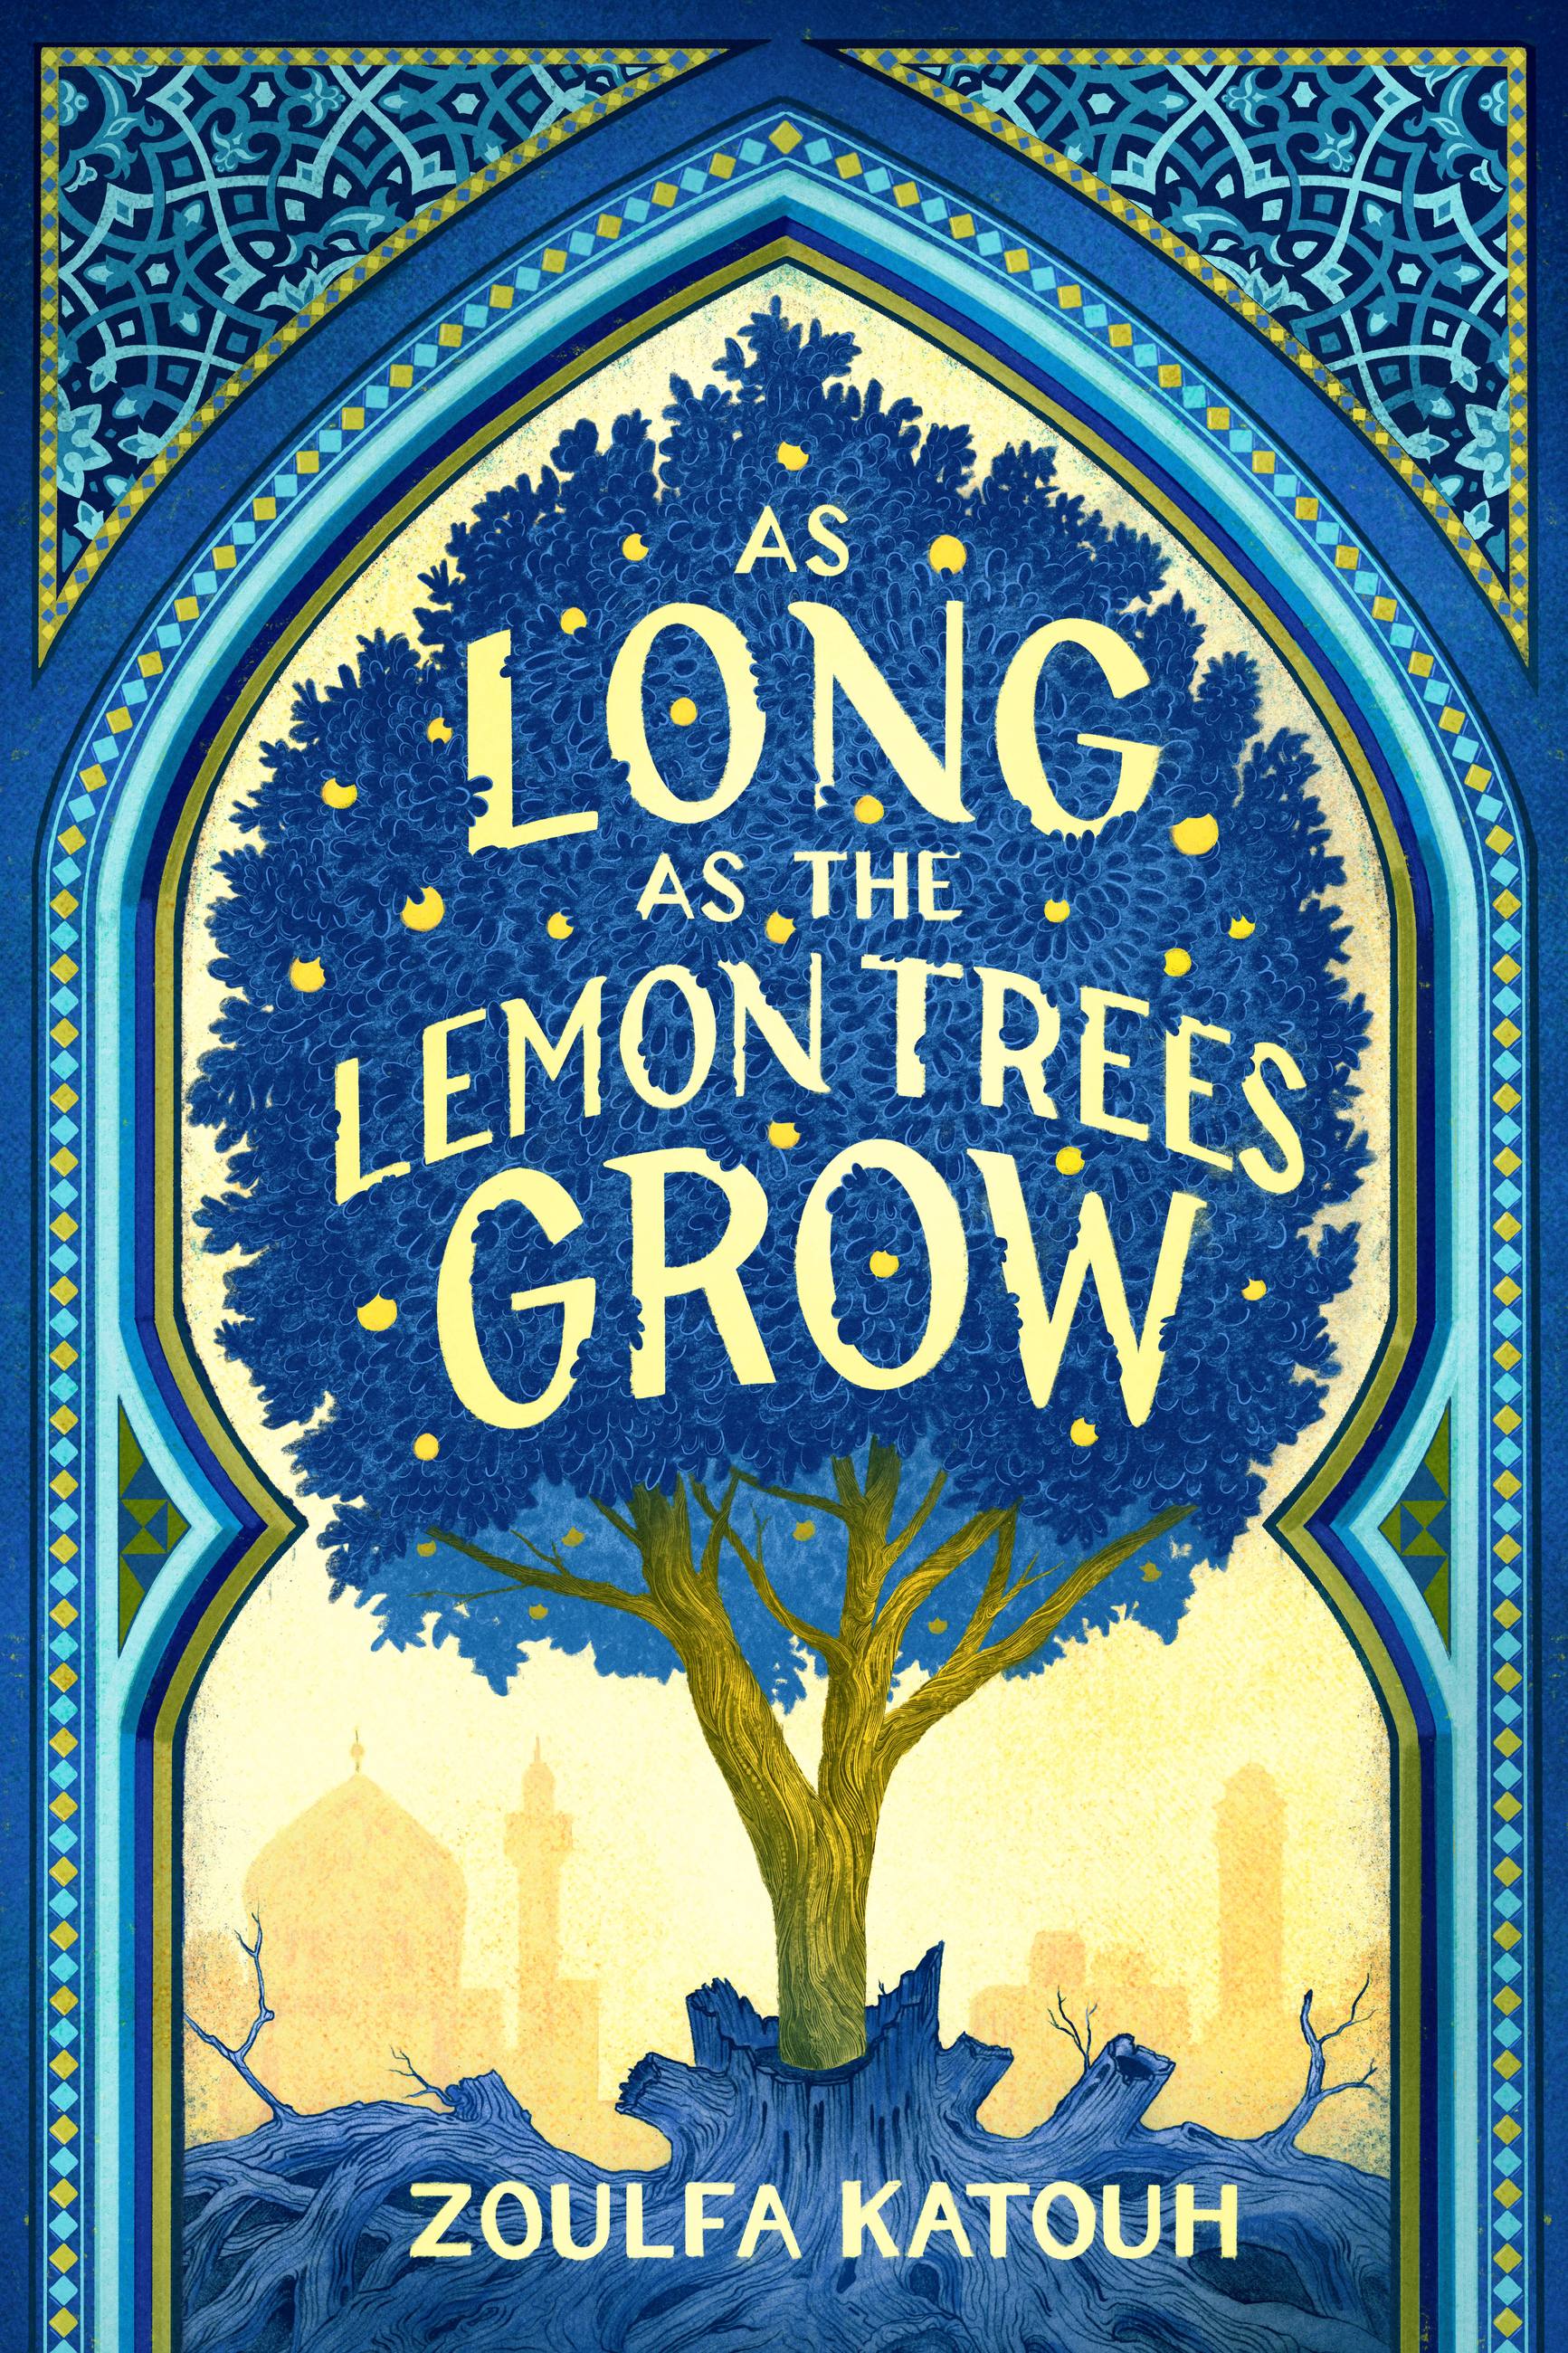 As Long as the Lemon Trees Grow by Zoulfa Katouh | Hachette Book Group